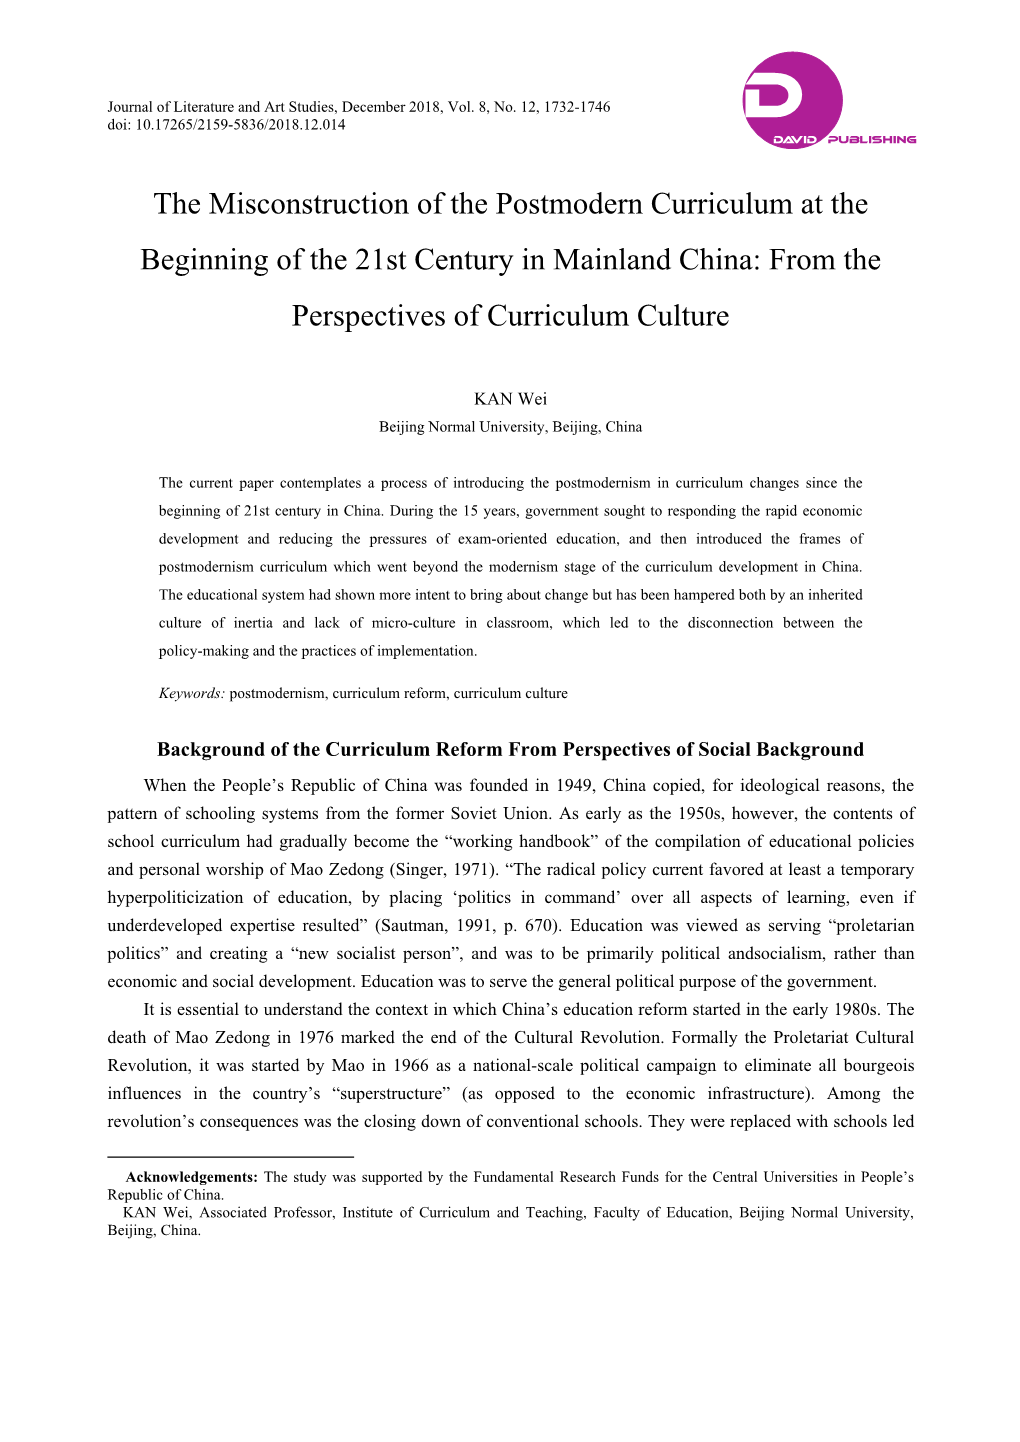 The Misconstruction of the Postmodern Curriculum at the Beginning of the 21St Century in Mainland China: from the Perspectives of Curriculum Culture